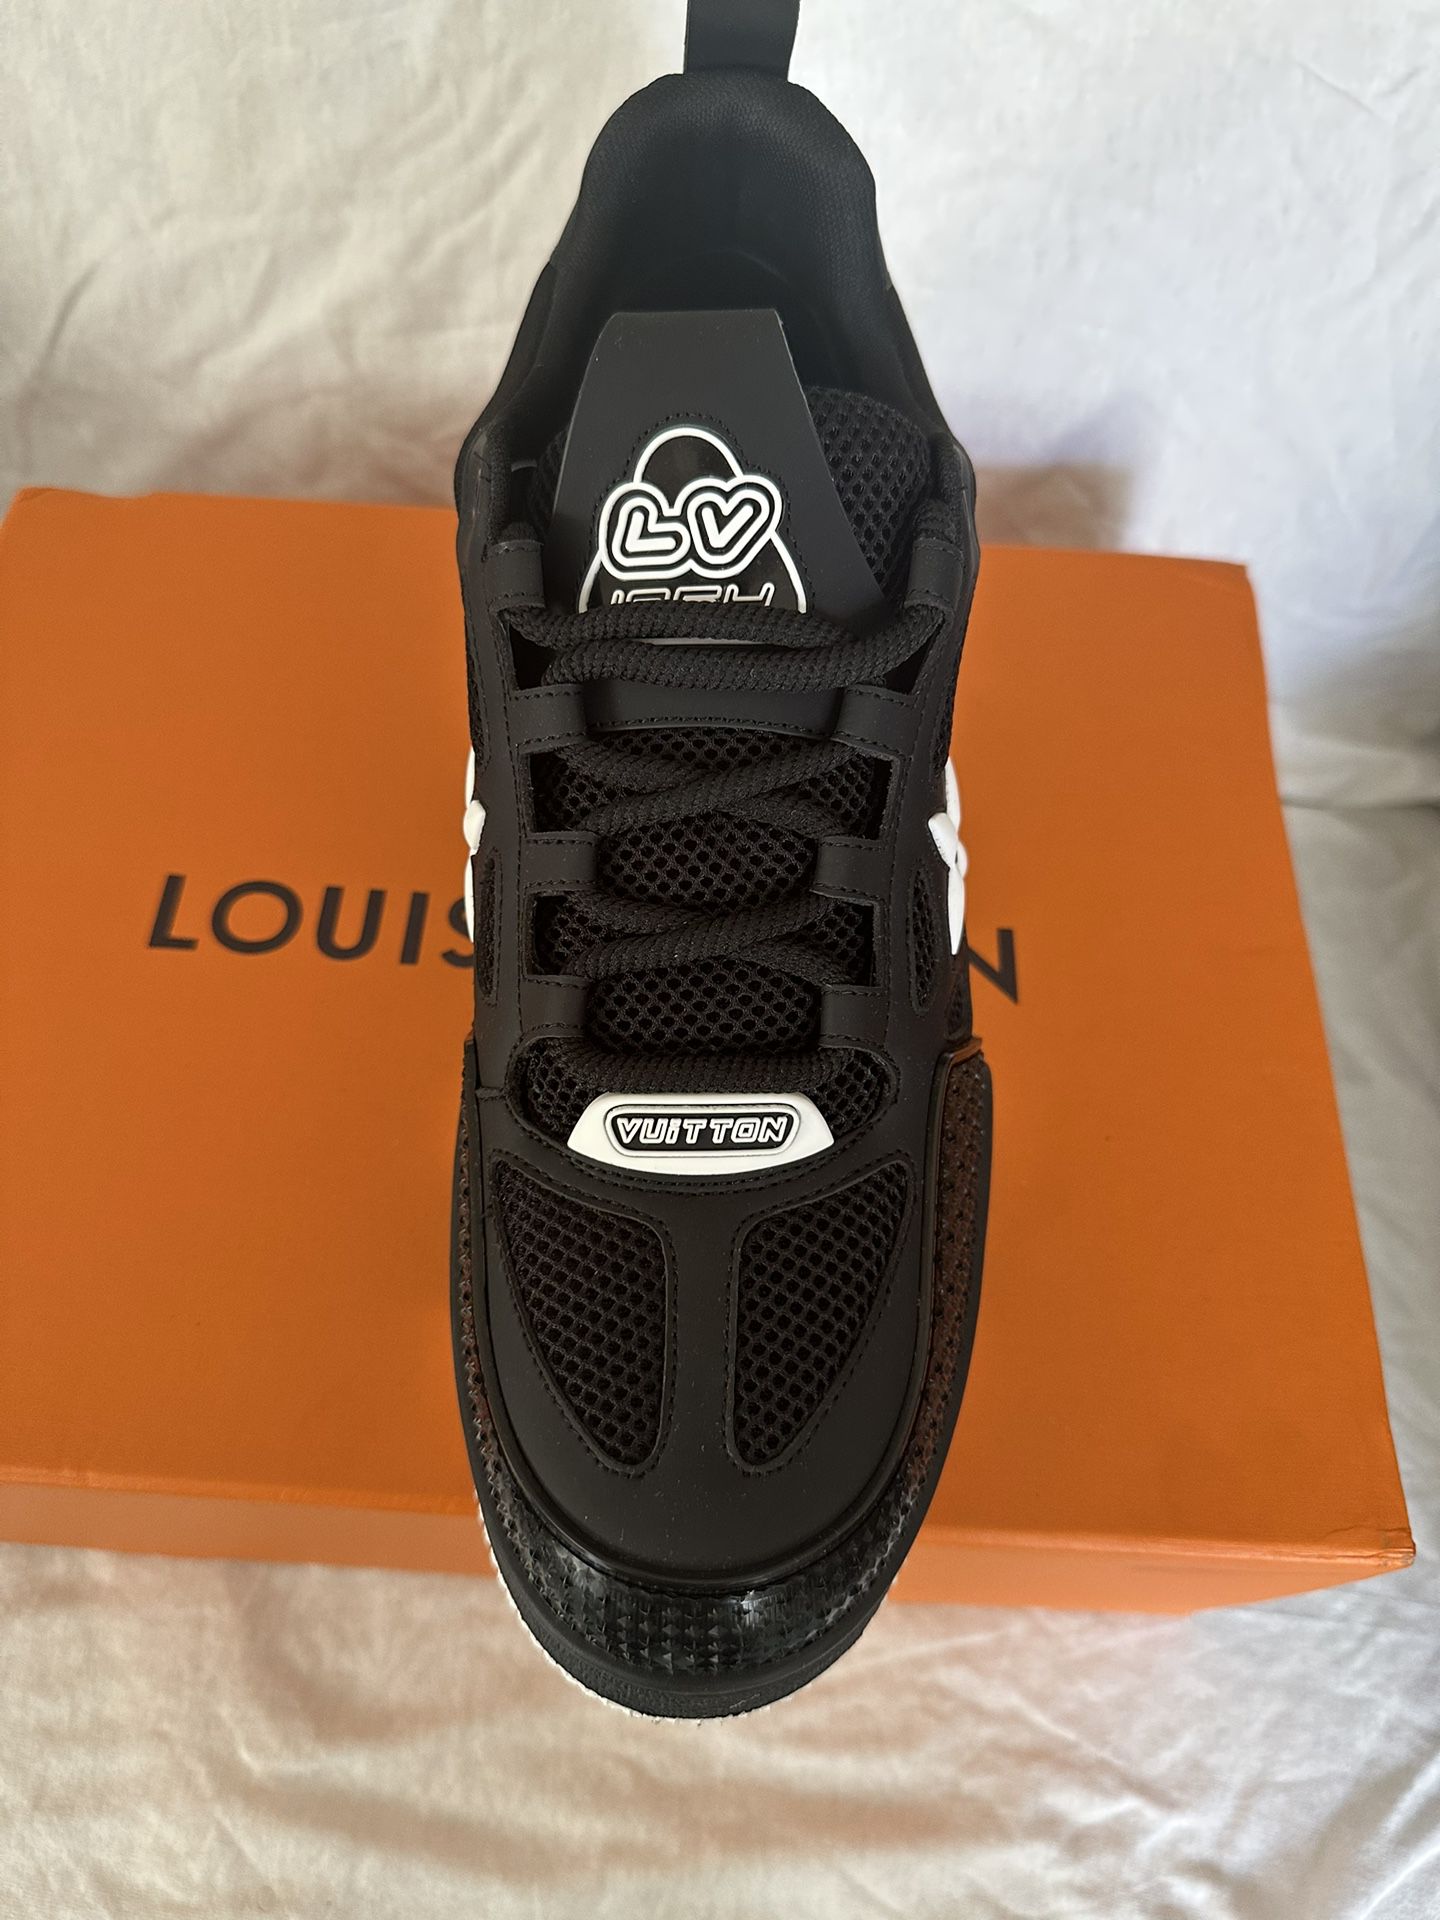 LV Archlight Sneaker for Sale in Washington, DC - OfferUp